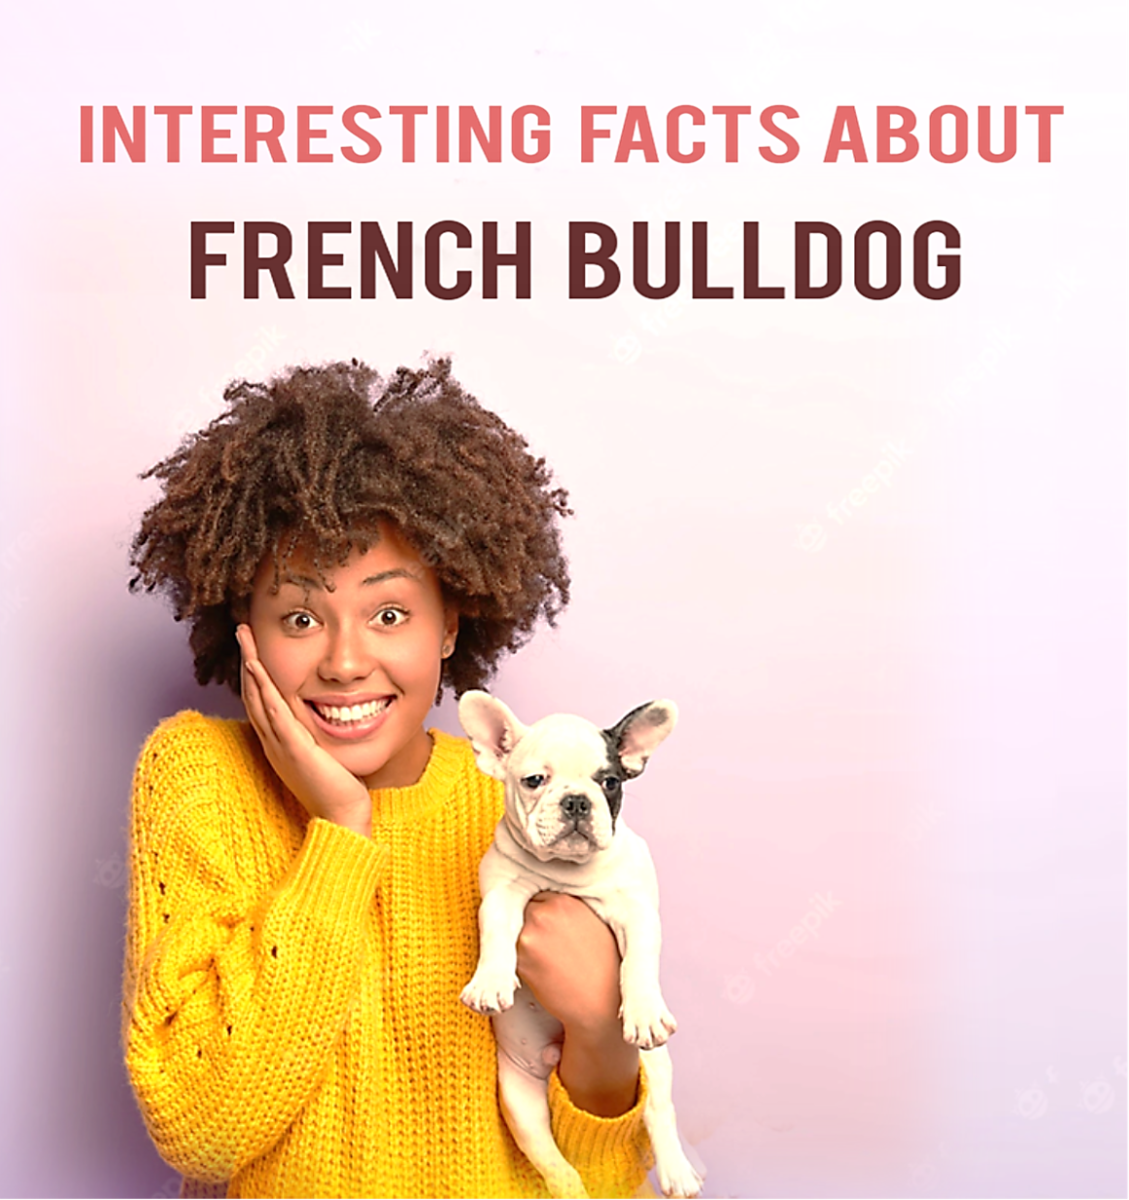 15 Interesting Facts about French Bulldog